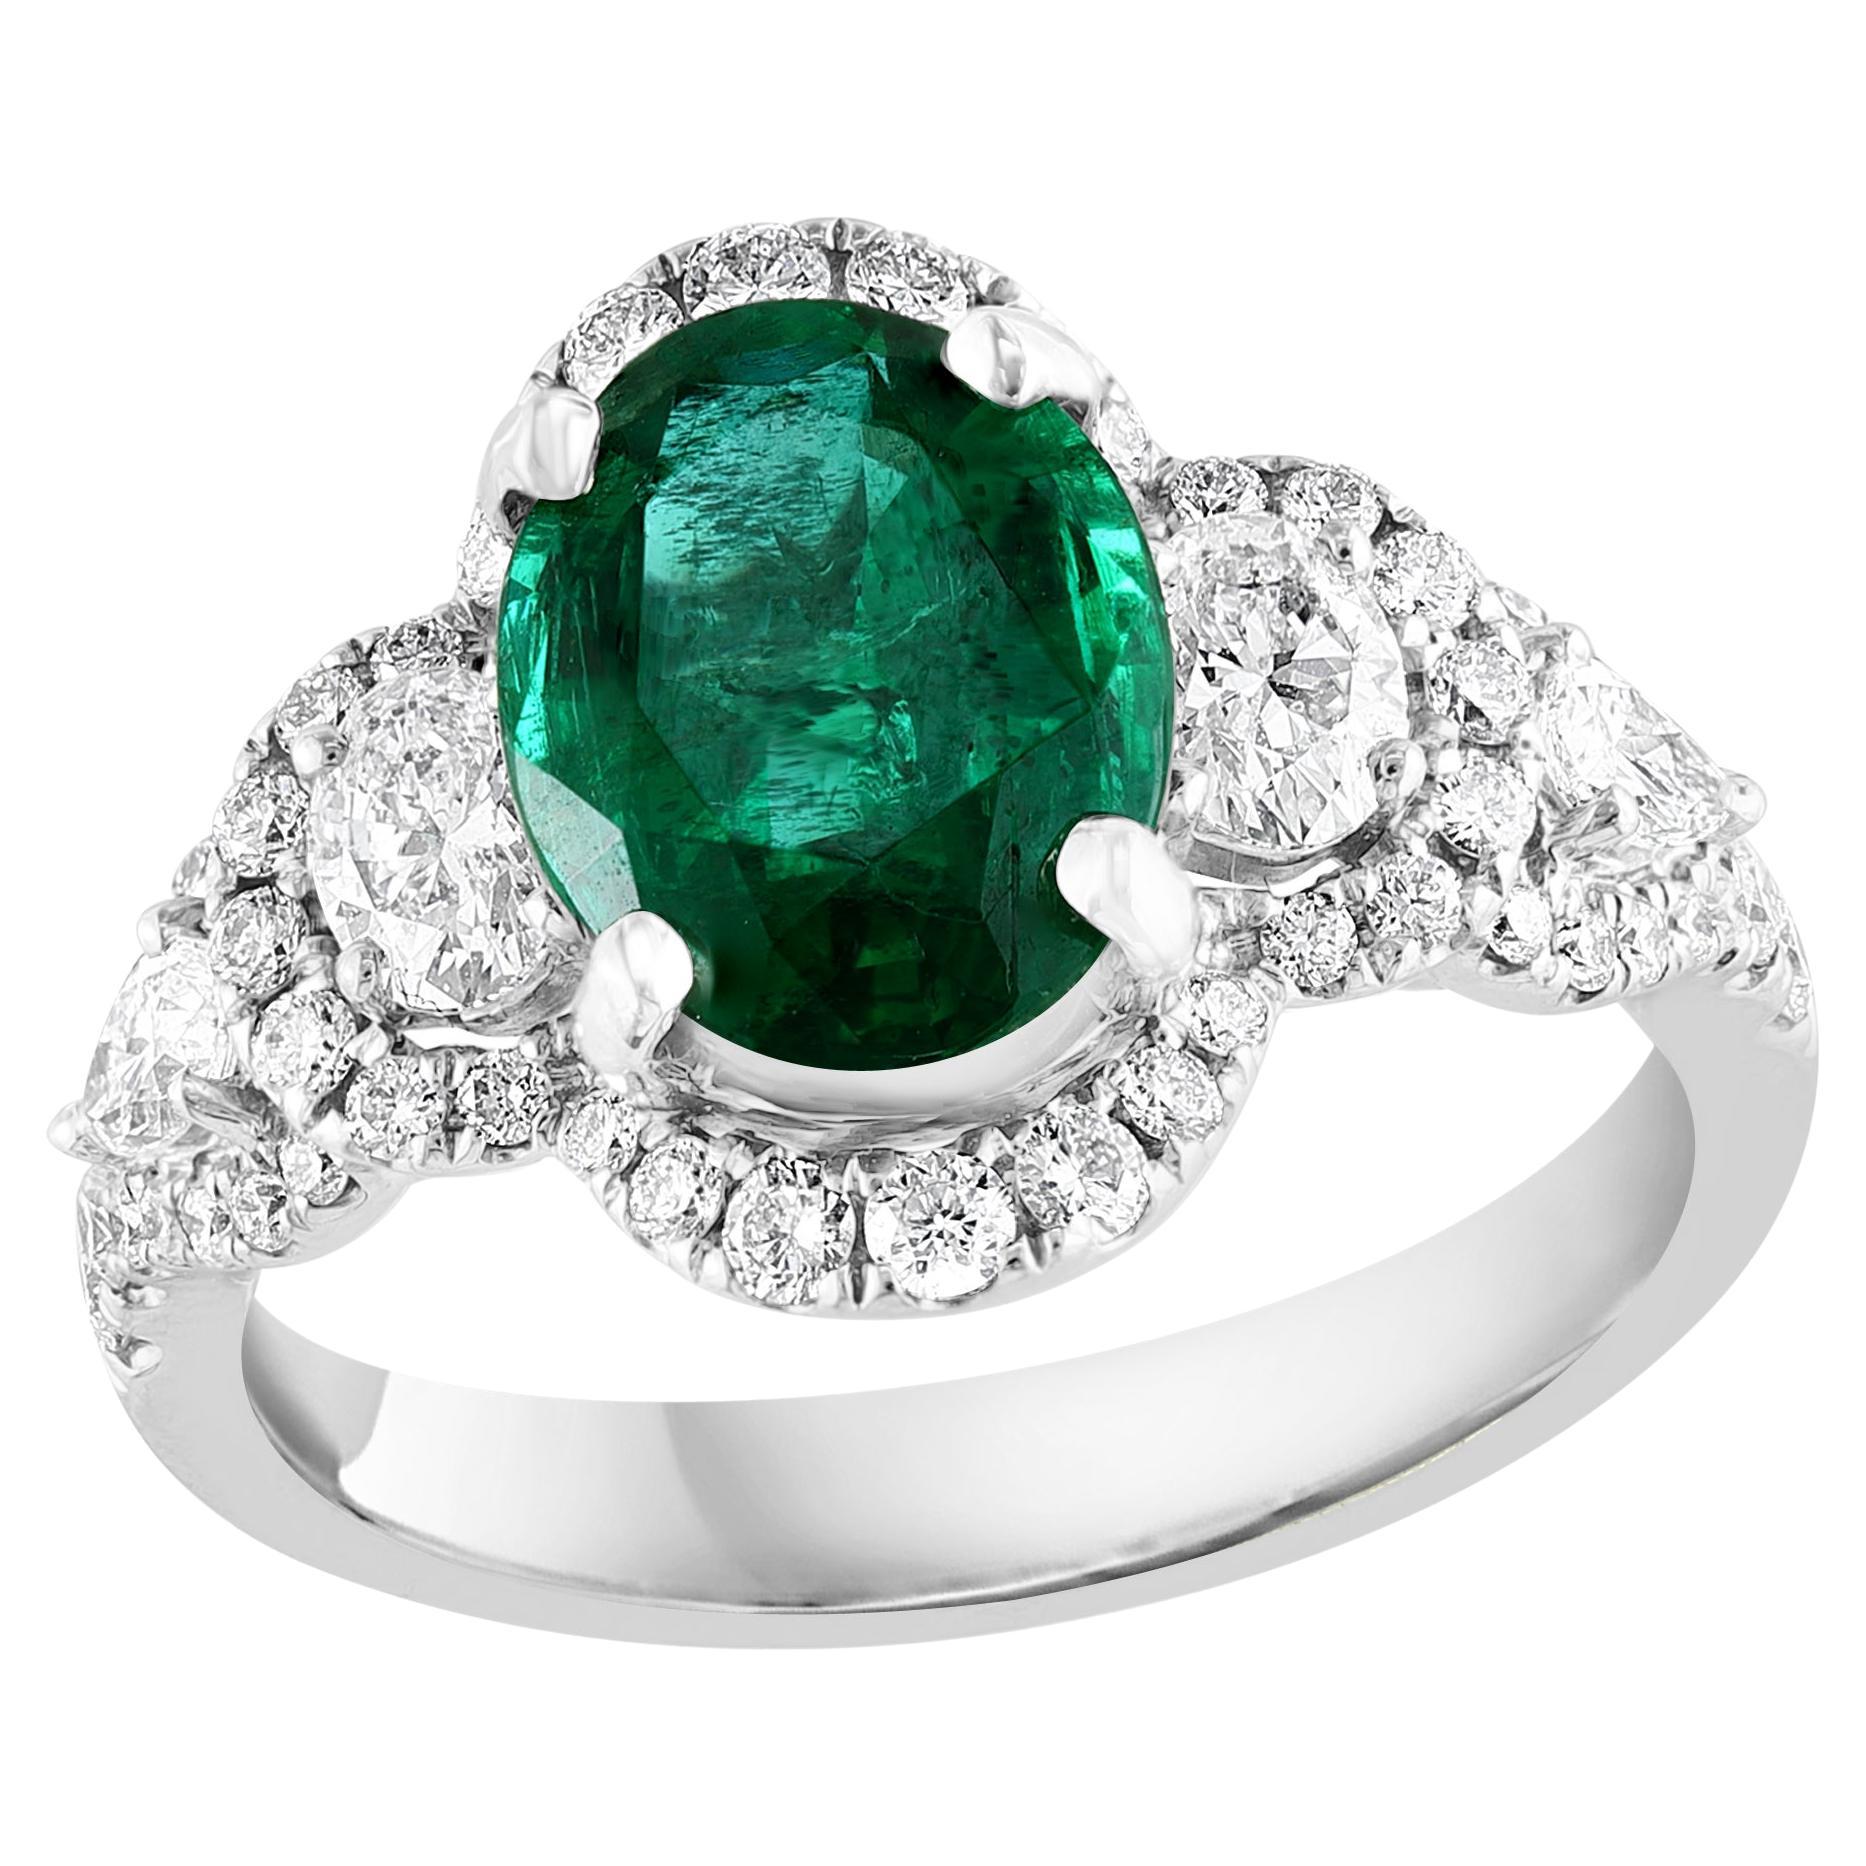 2.15 Carat Oval Cut Emerald and Diamond Halo Ring in 18K White Gold For Sale